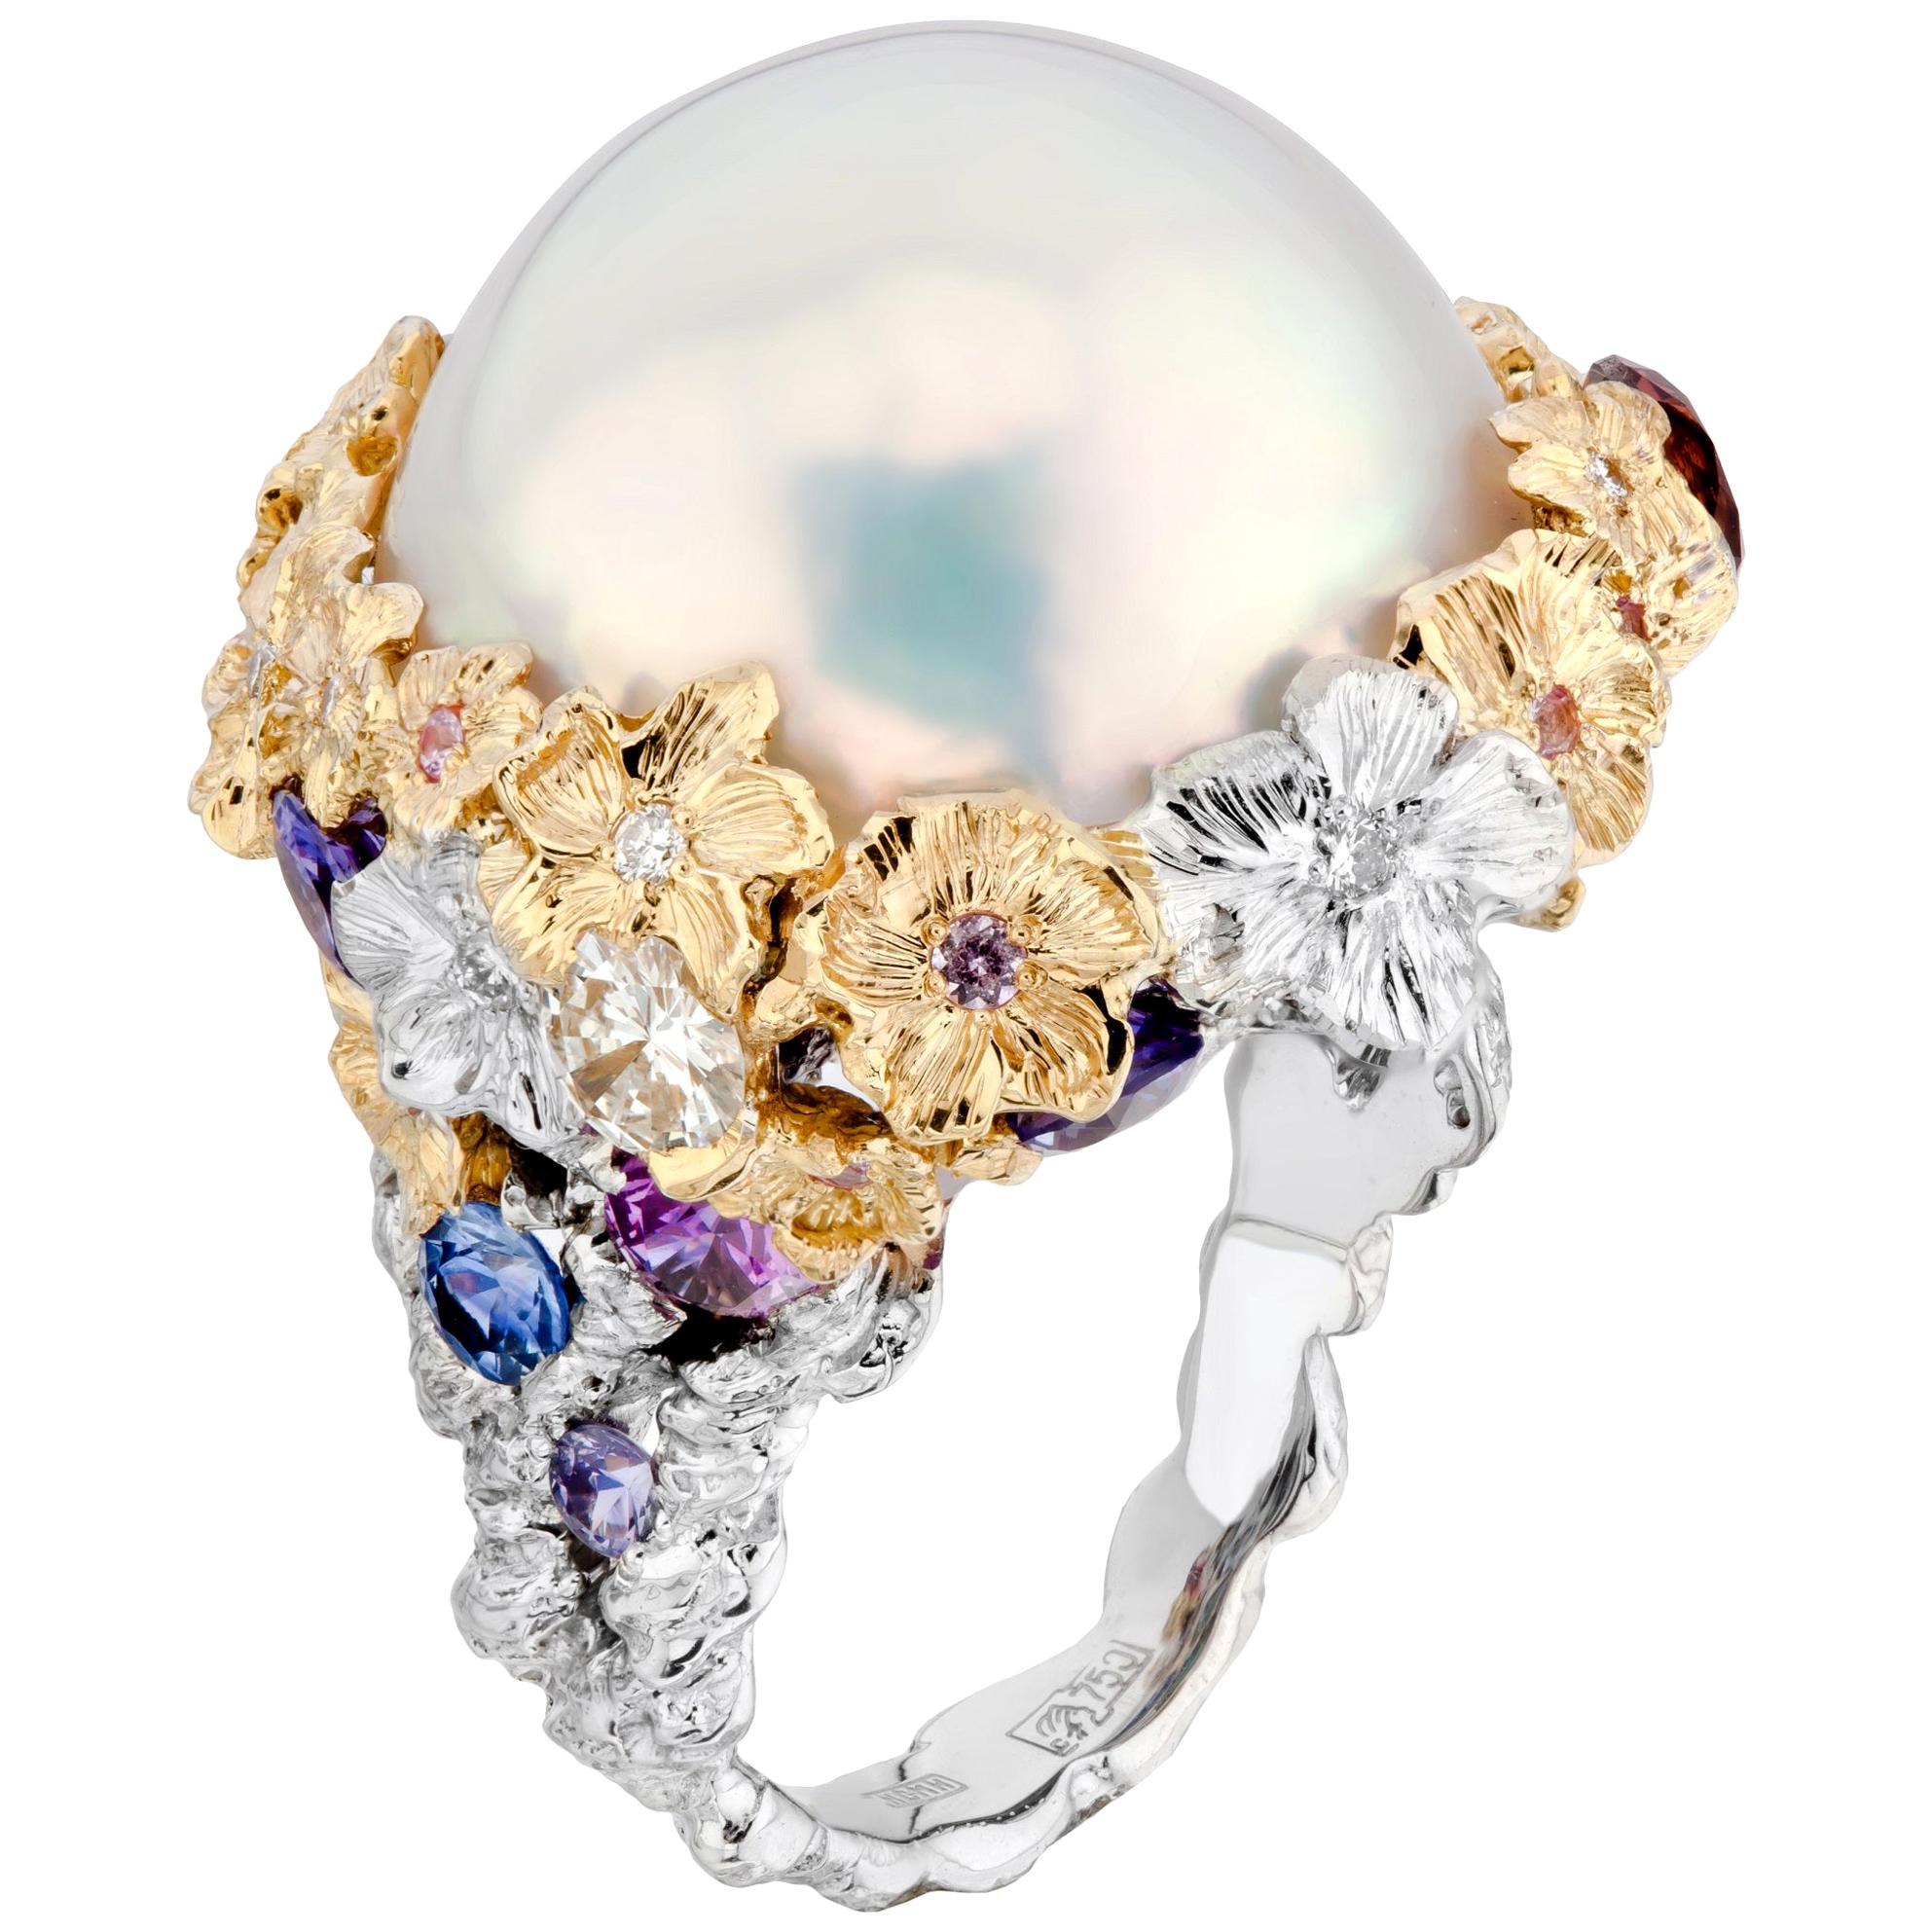 Moiseikin 18 Karat Gold Mabe Pearl and Sapphire Ring For Sale